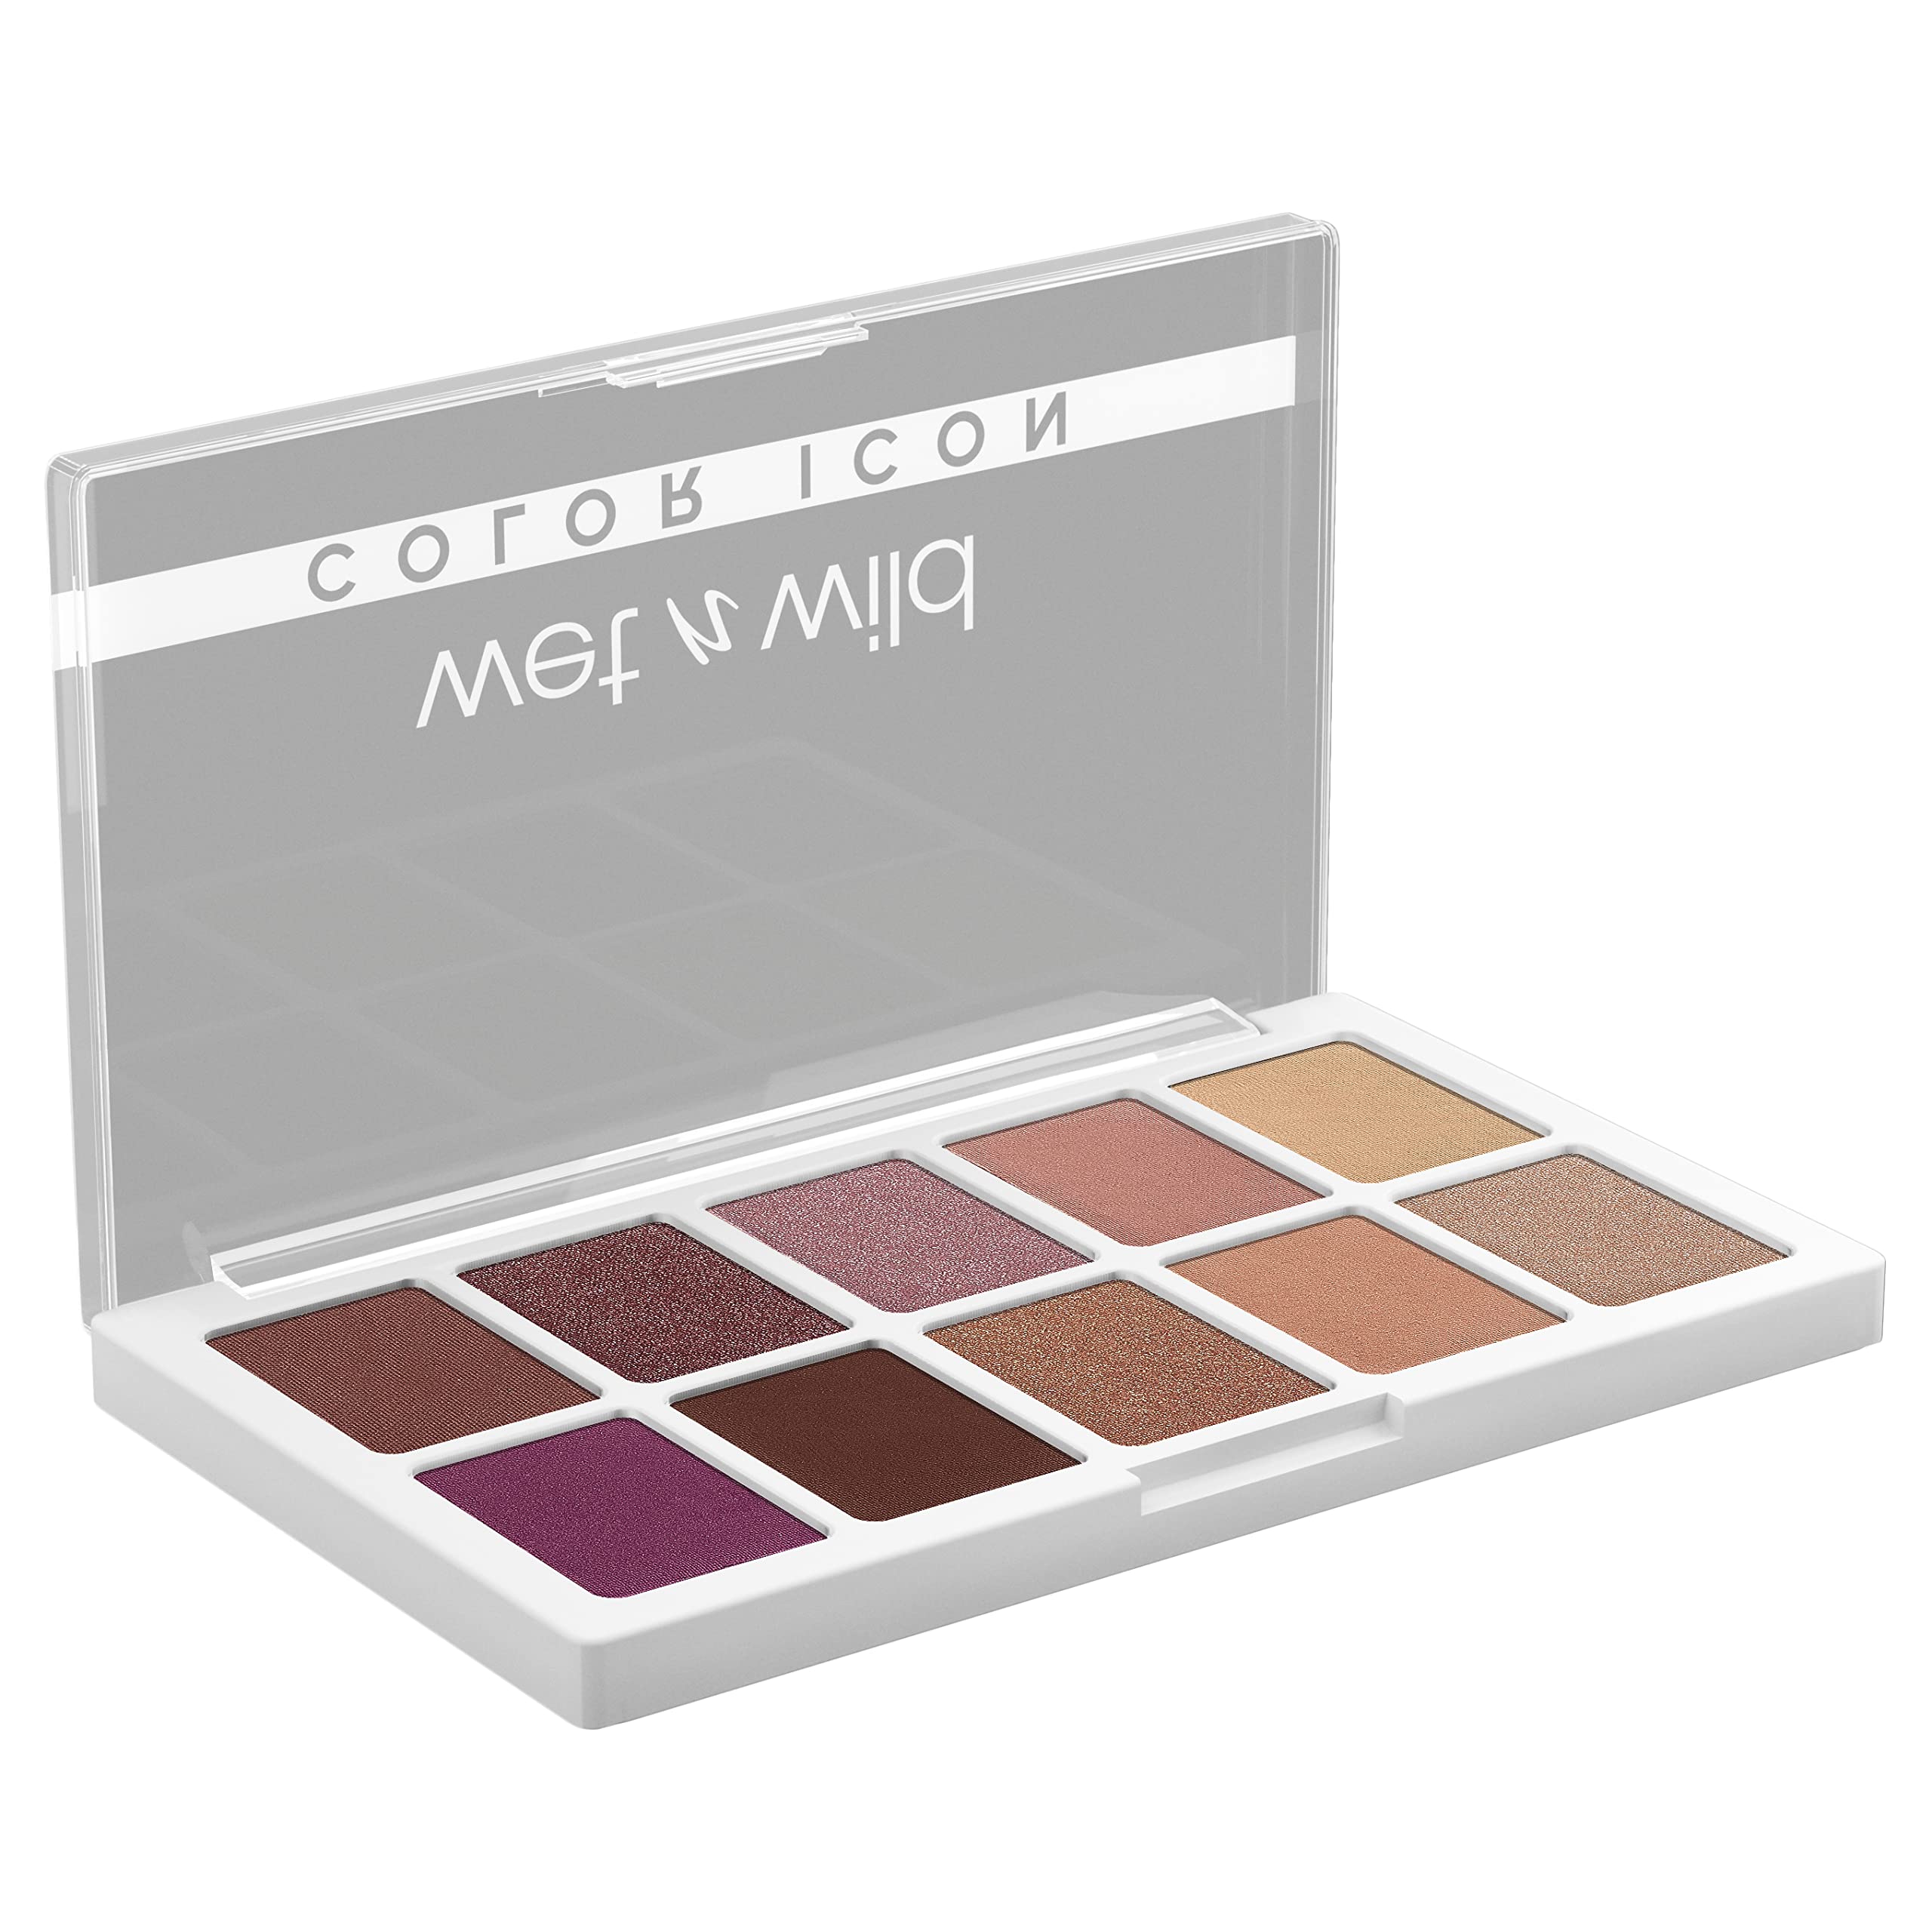 Eyeshadow By Wet n Wild Color Icon 10-Pan Eye Makeup Palette, Pink Heart And Sol, Long Lasting, Shimmer, Metallic, Glittery, Matte, Rich Smooth Pigment, Cruelty Free